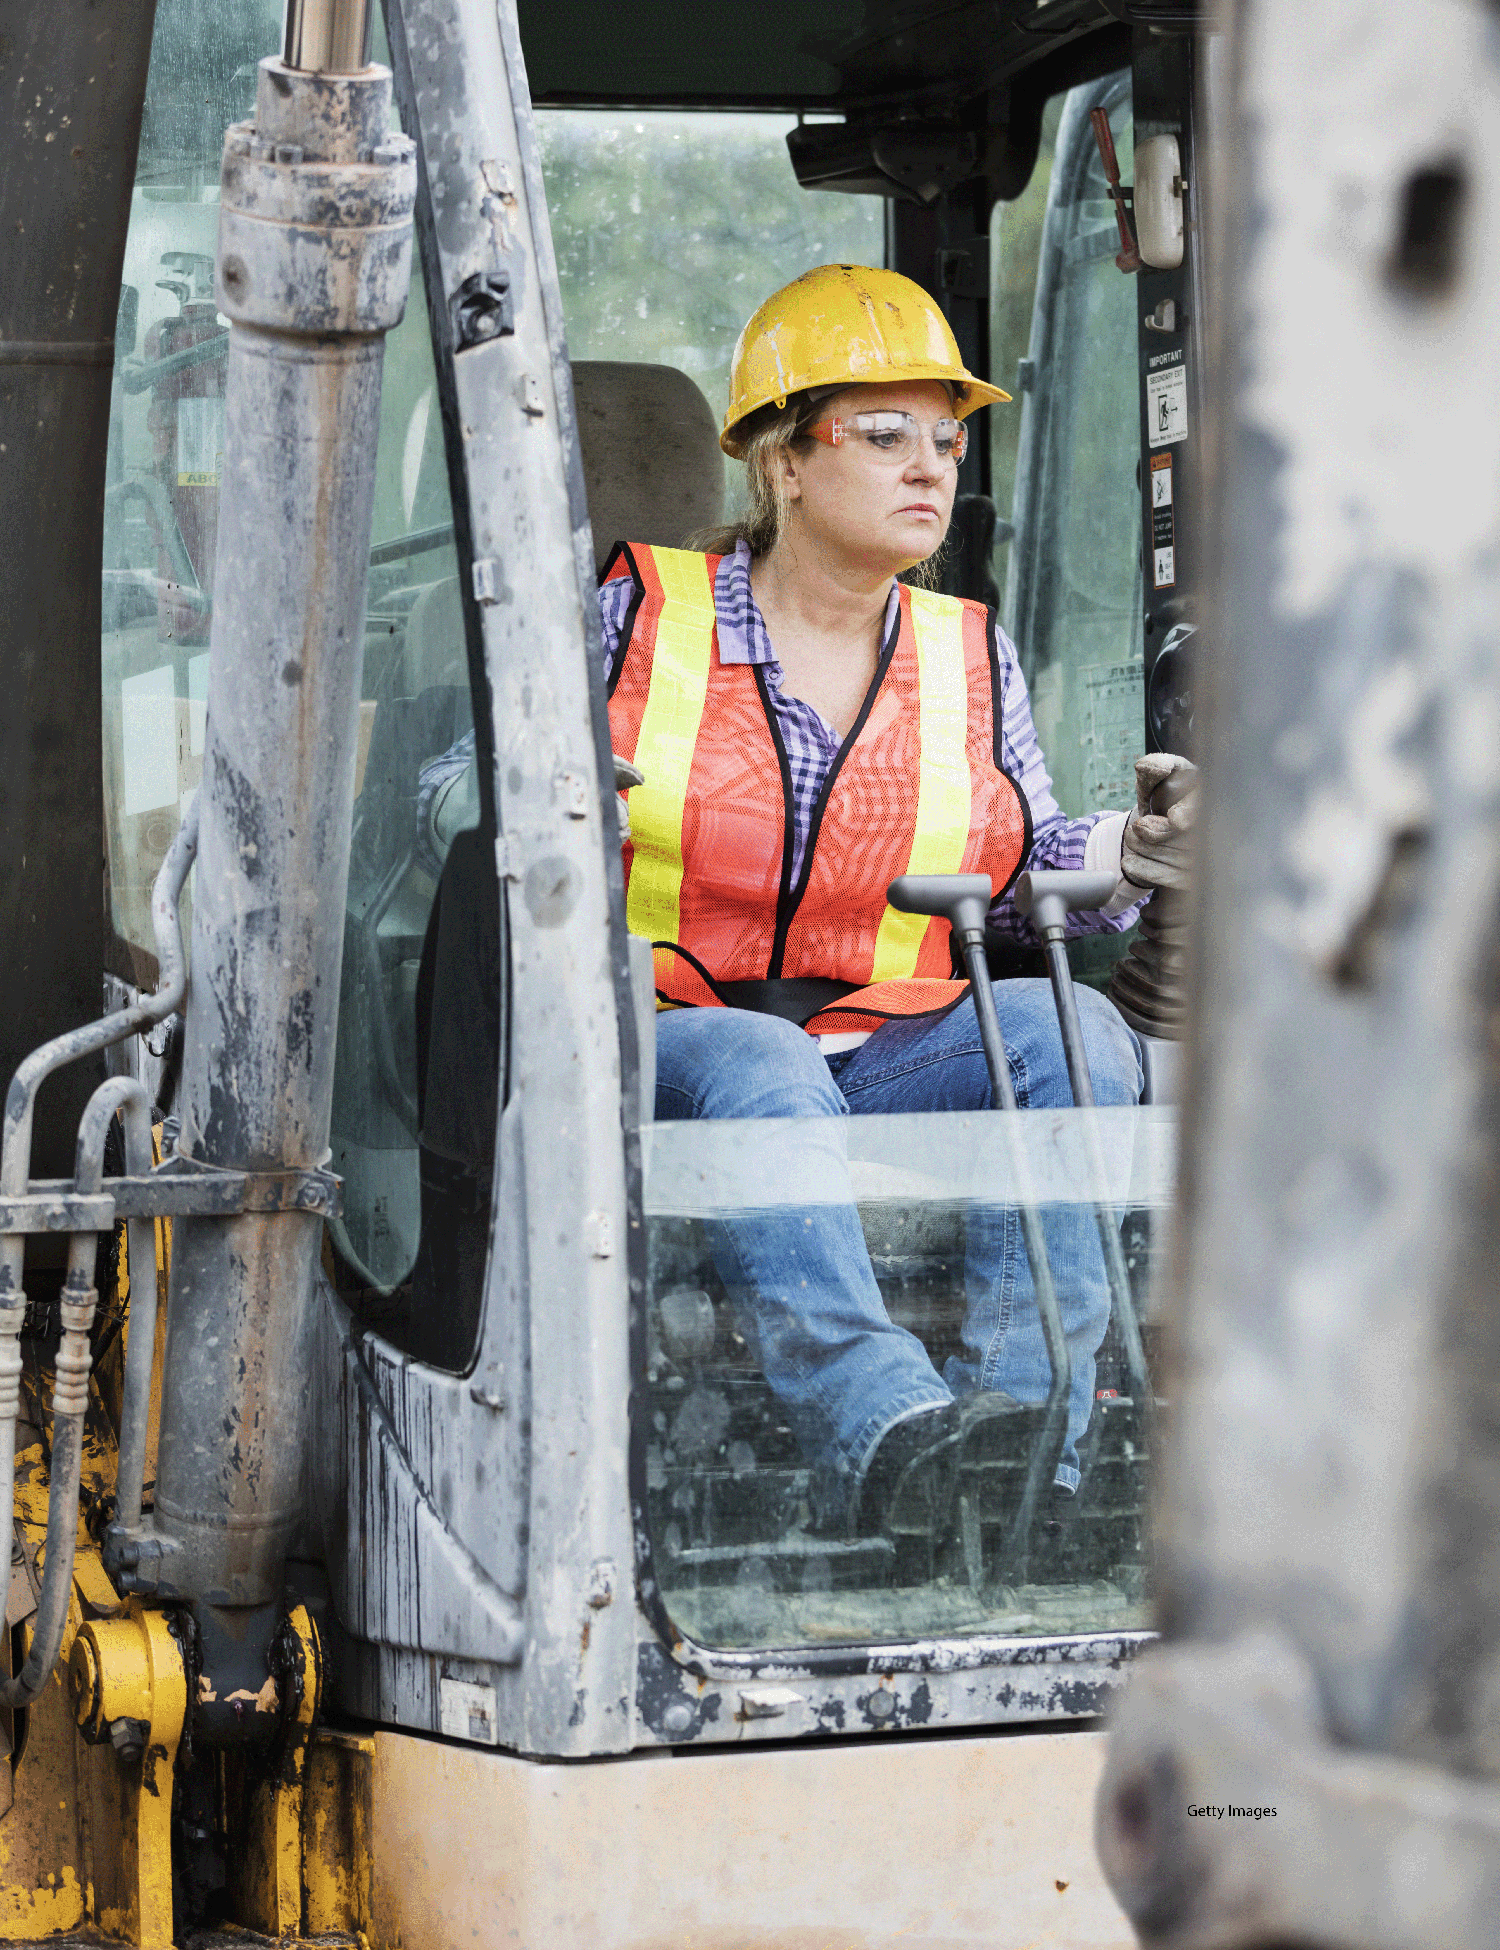 A woman operating construction equipment is shown.